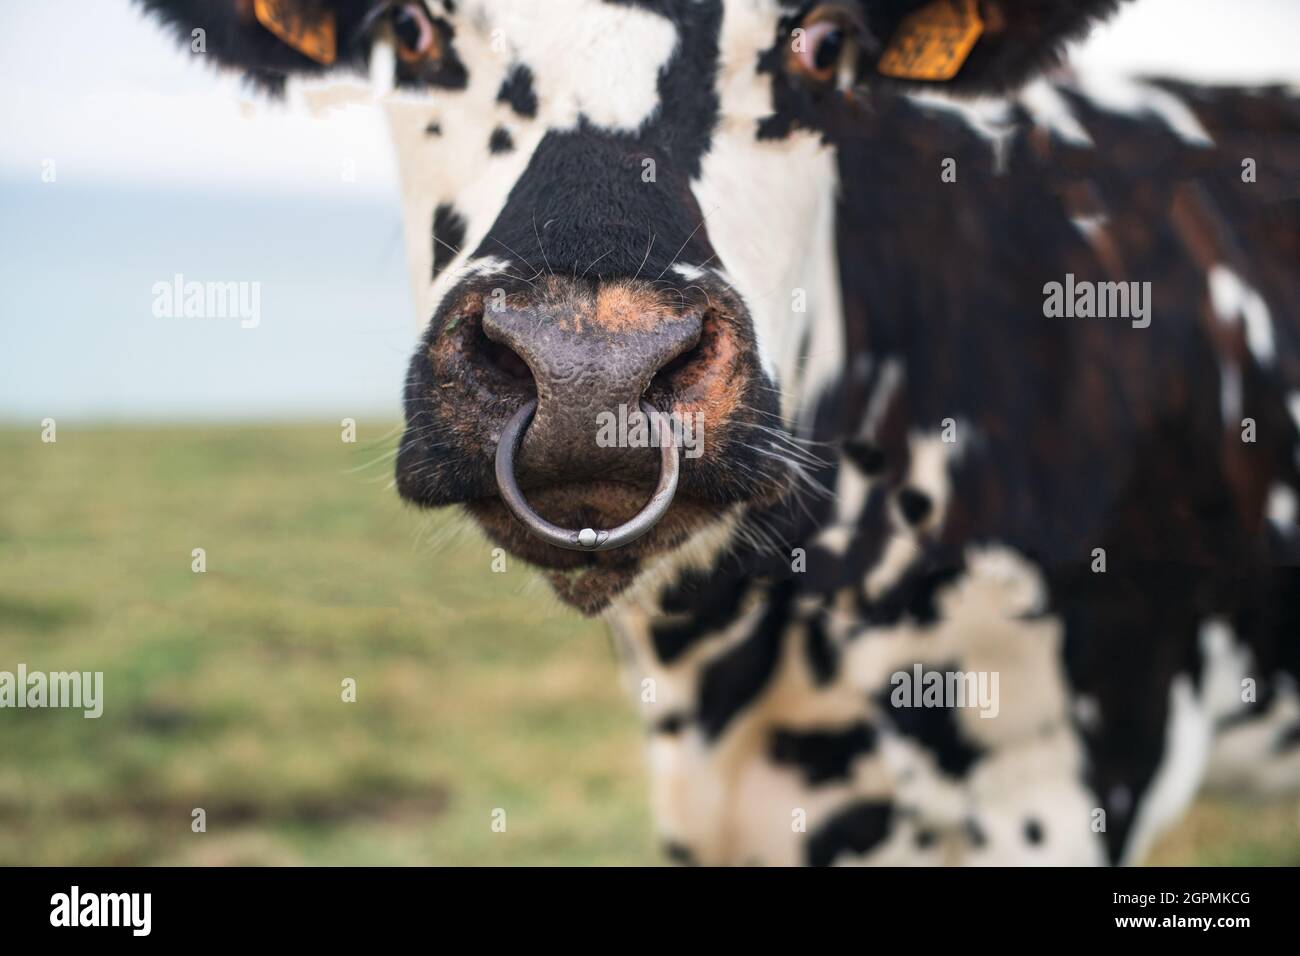 Spotted cow with a pierced nose in Normandy, France Stock Photo